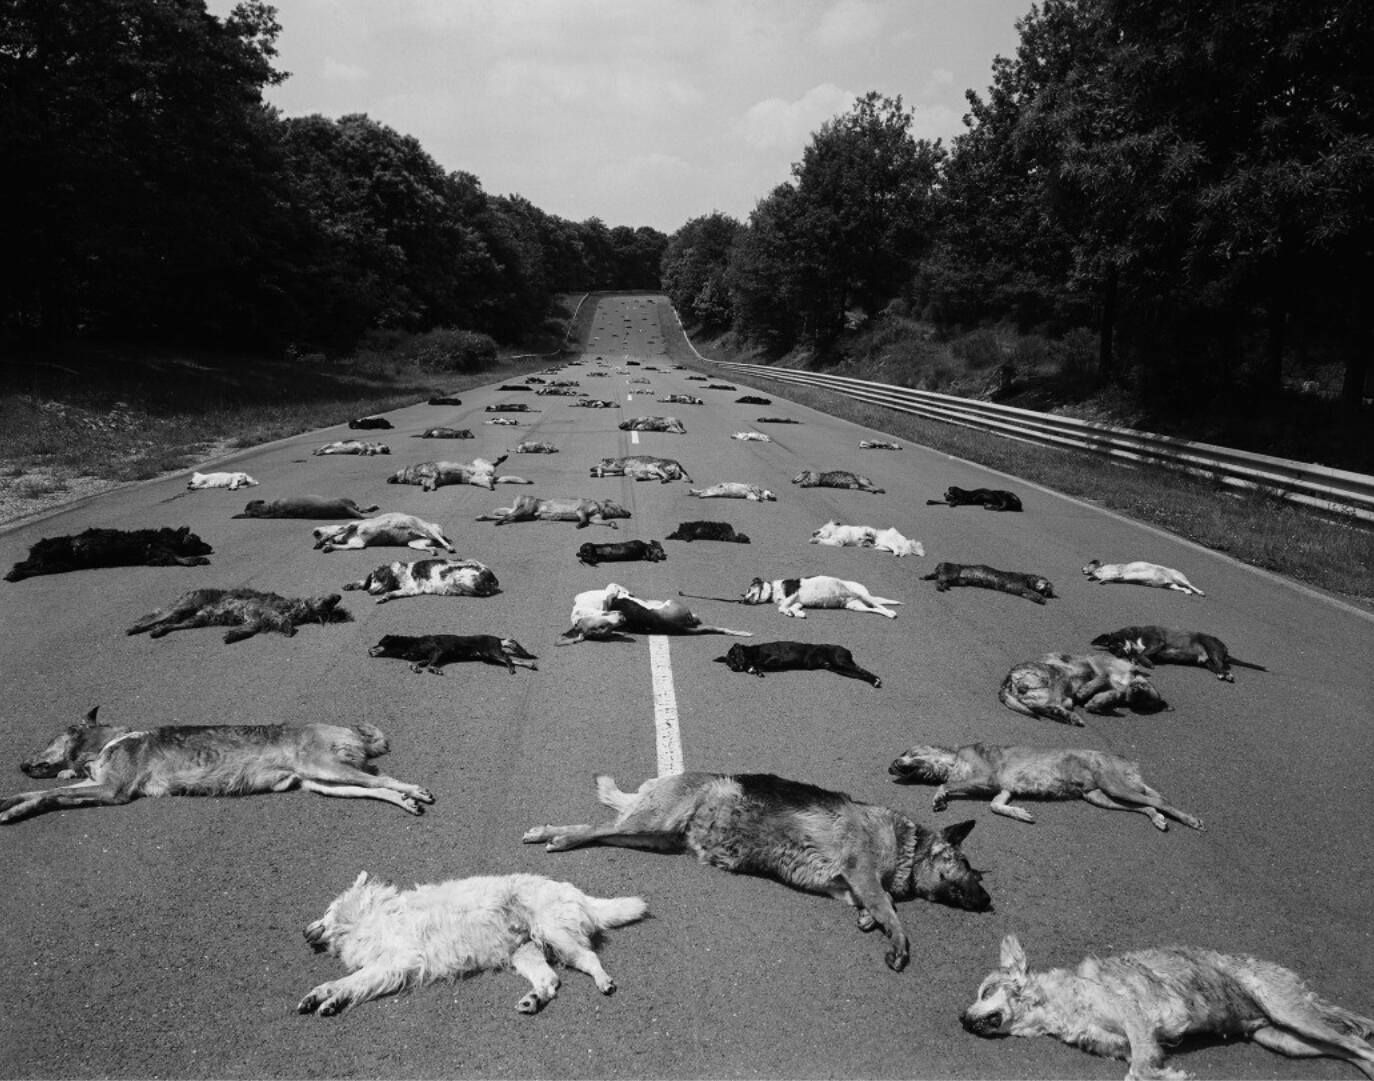 Abandoned dogs on the summer road